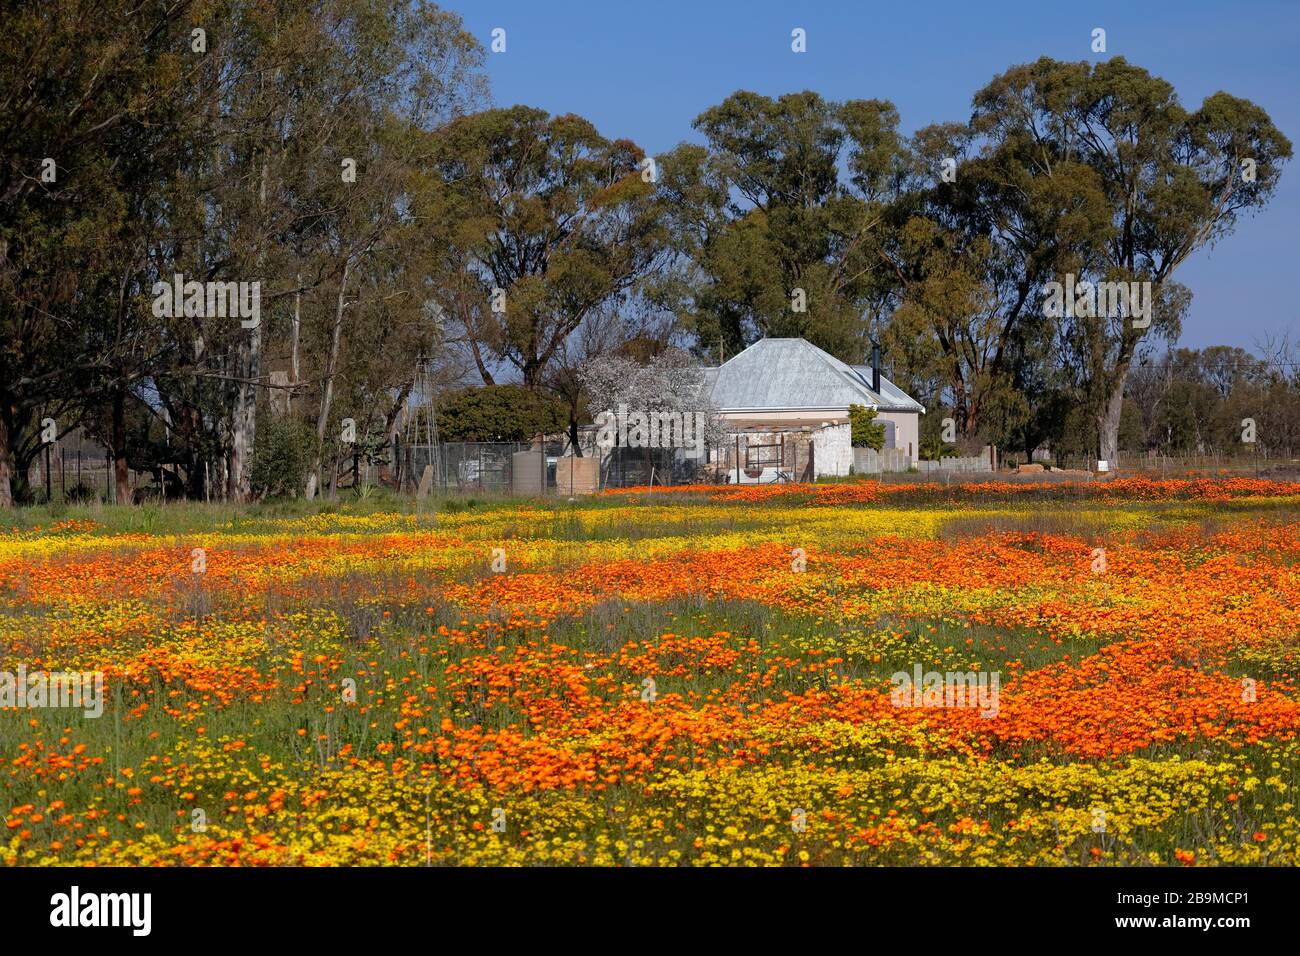 Wild Flowers, gazanias and daisies, sprawl abundantly across a field during the wild flower season in the village of Nieuwoudtville, Northern Cape. Stock Photo